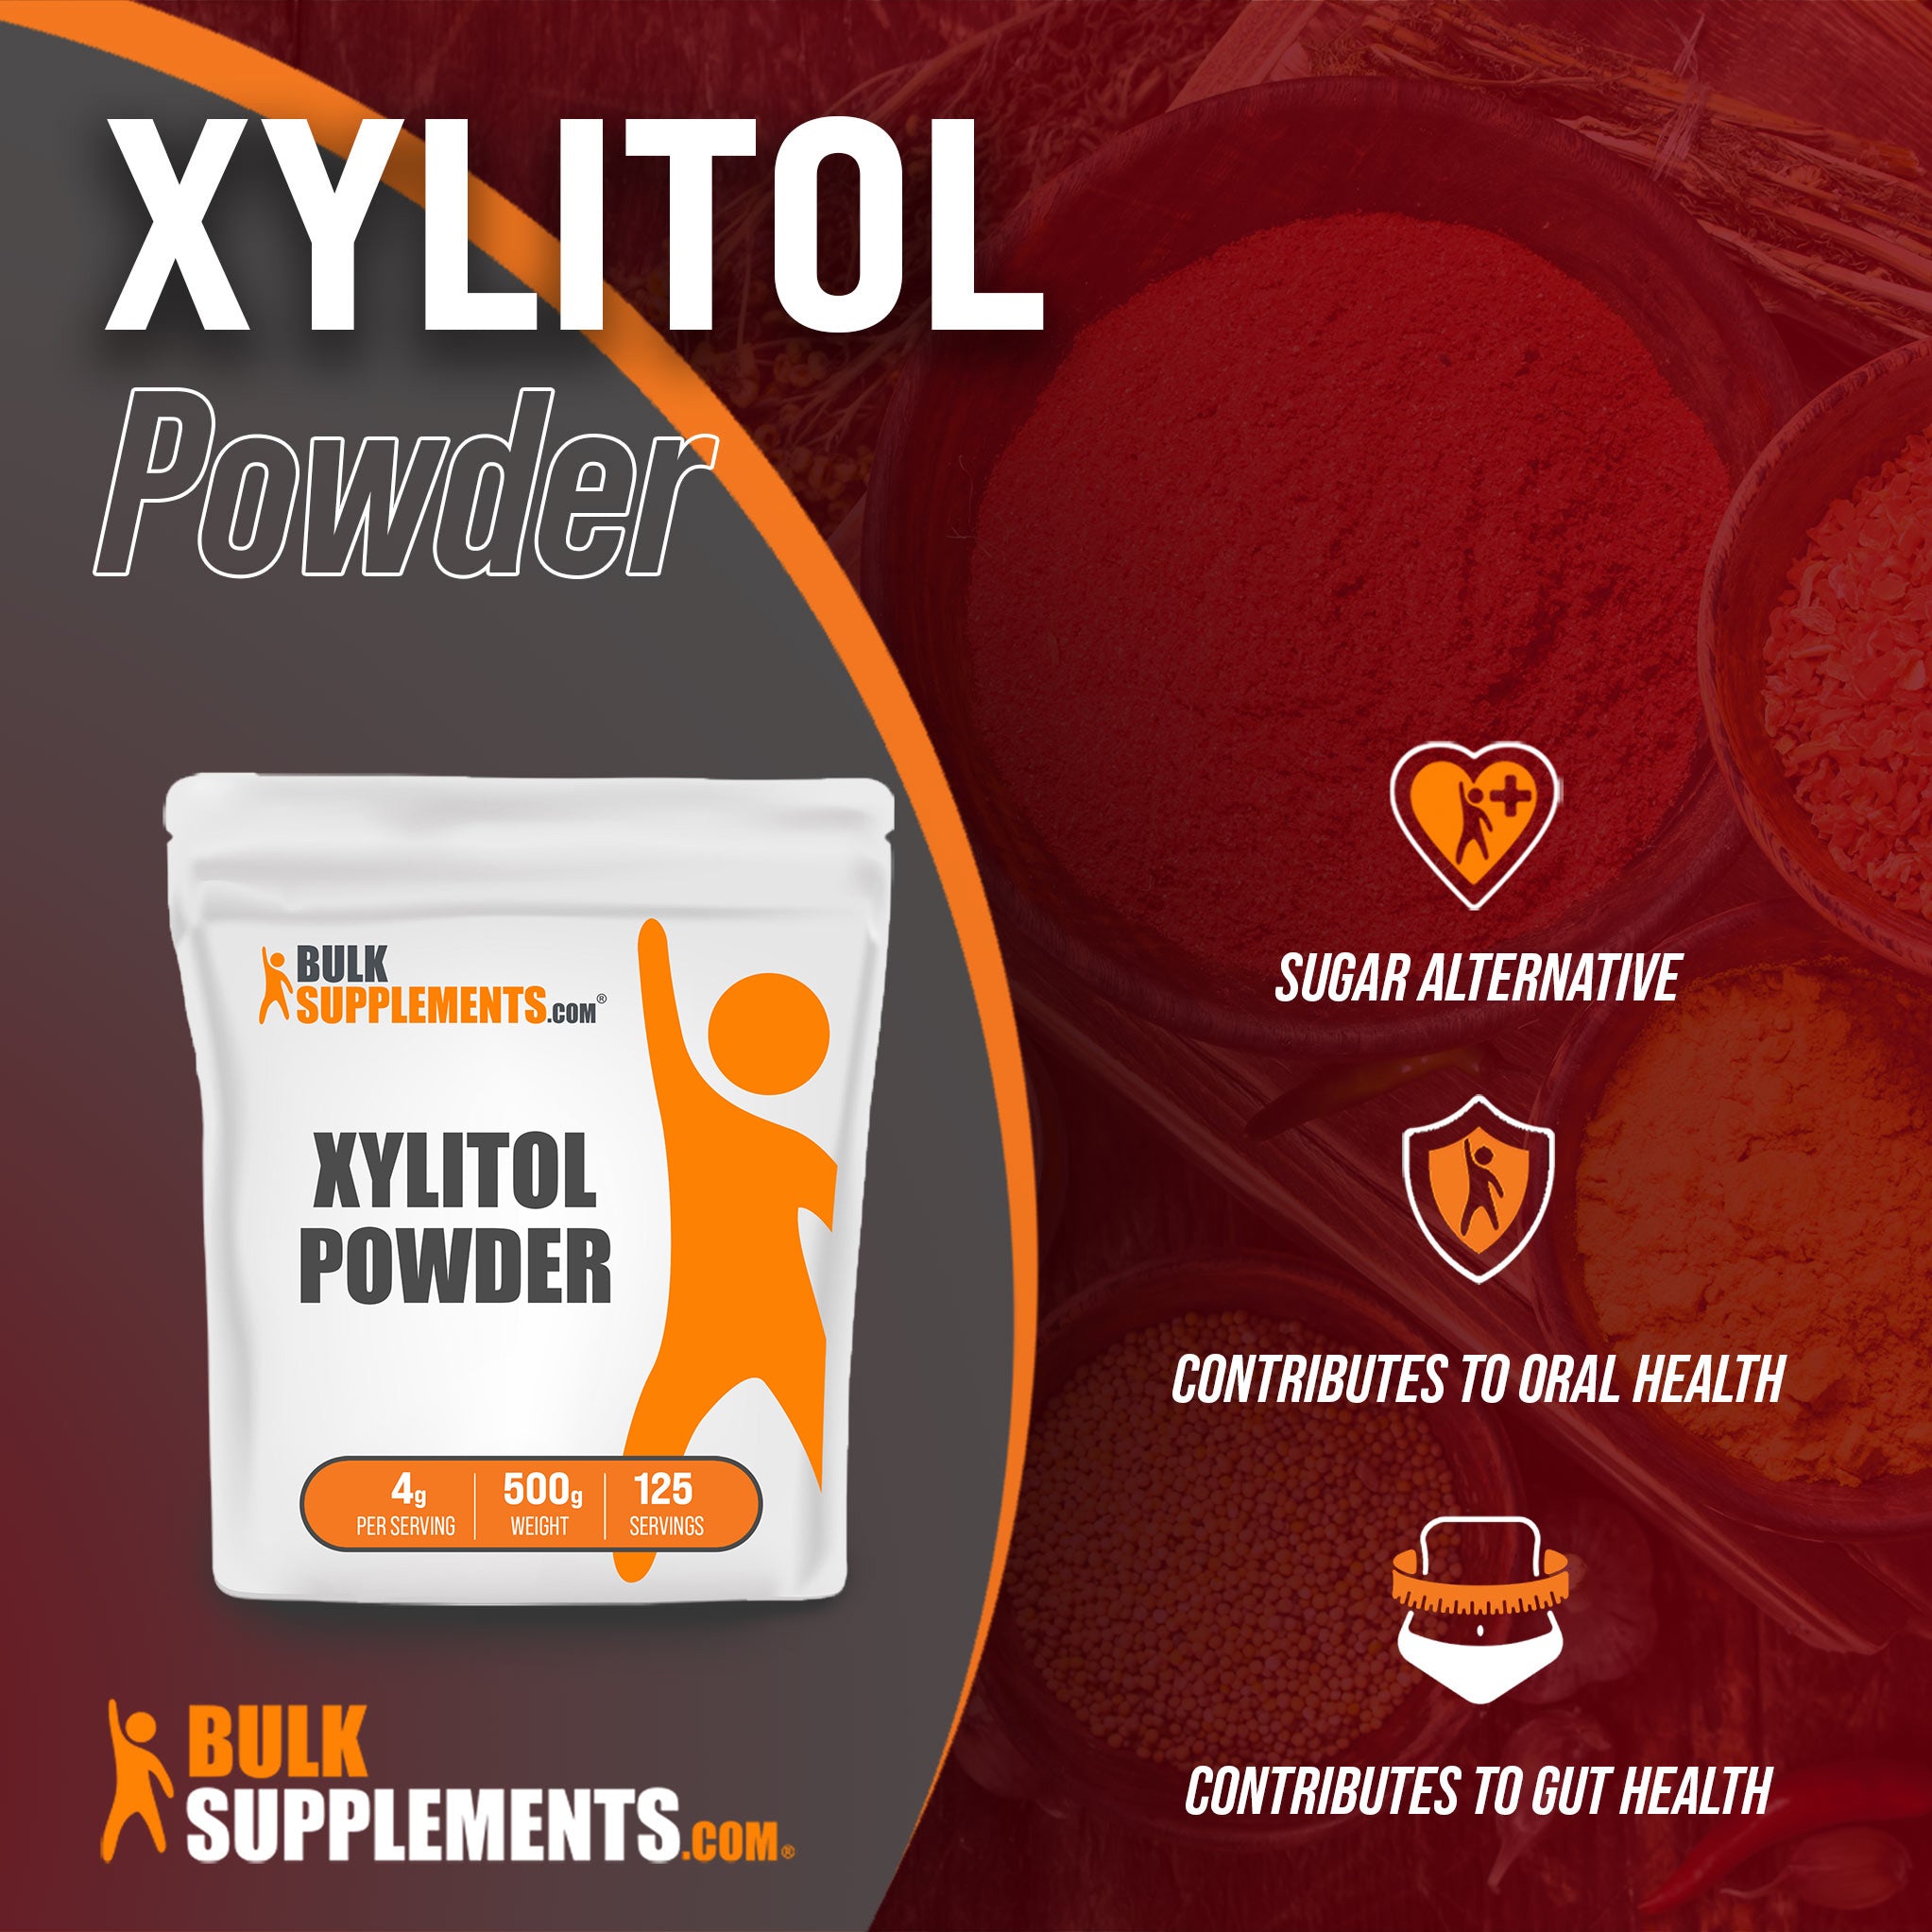 Benefits of Xylitol: sugar alternative, contributes to oral health, contributes to gut health